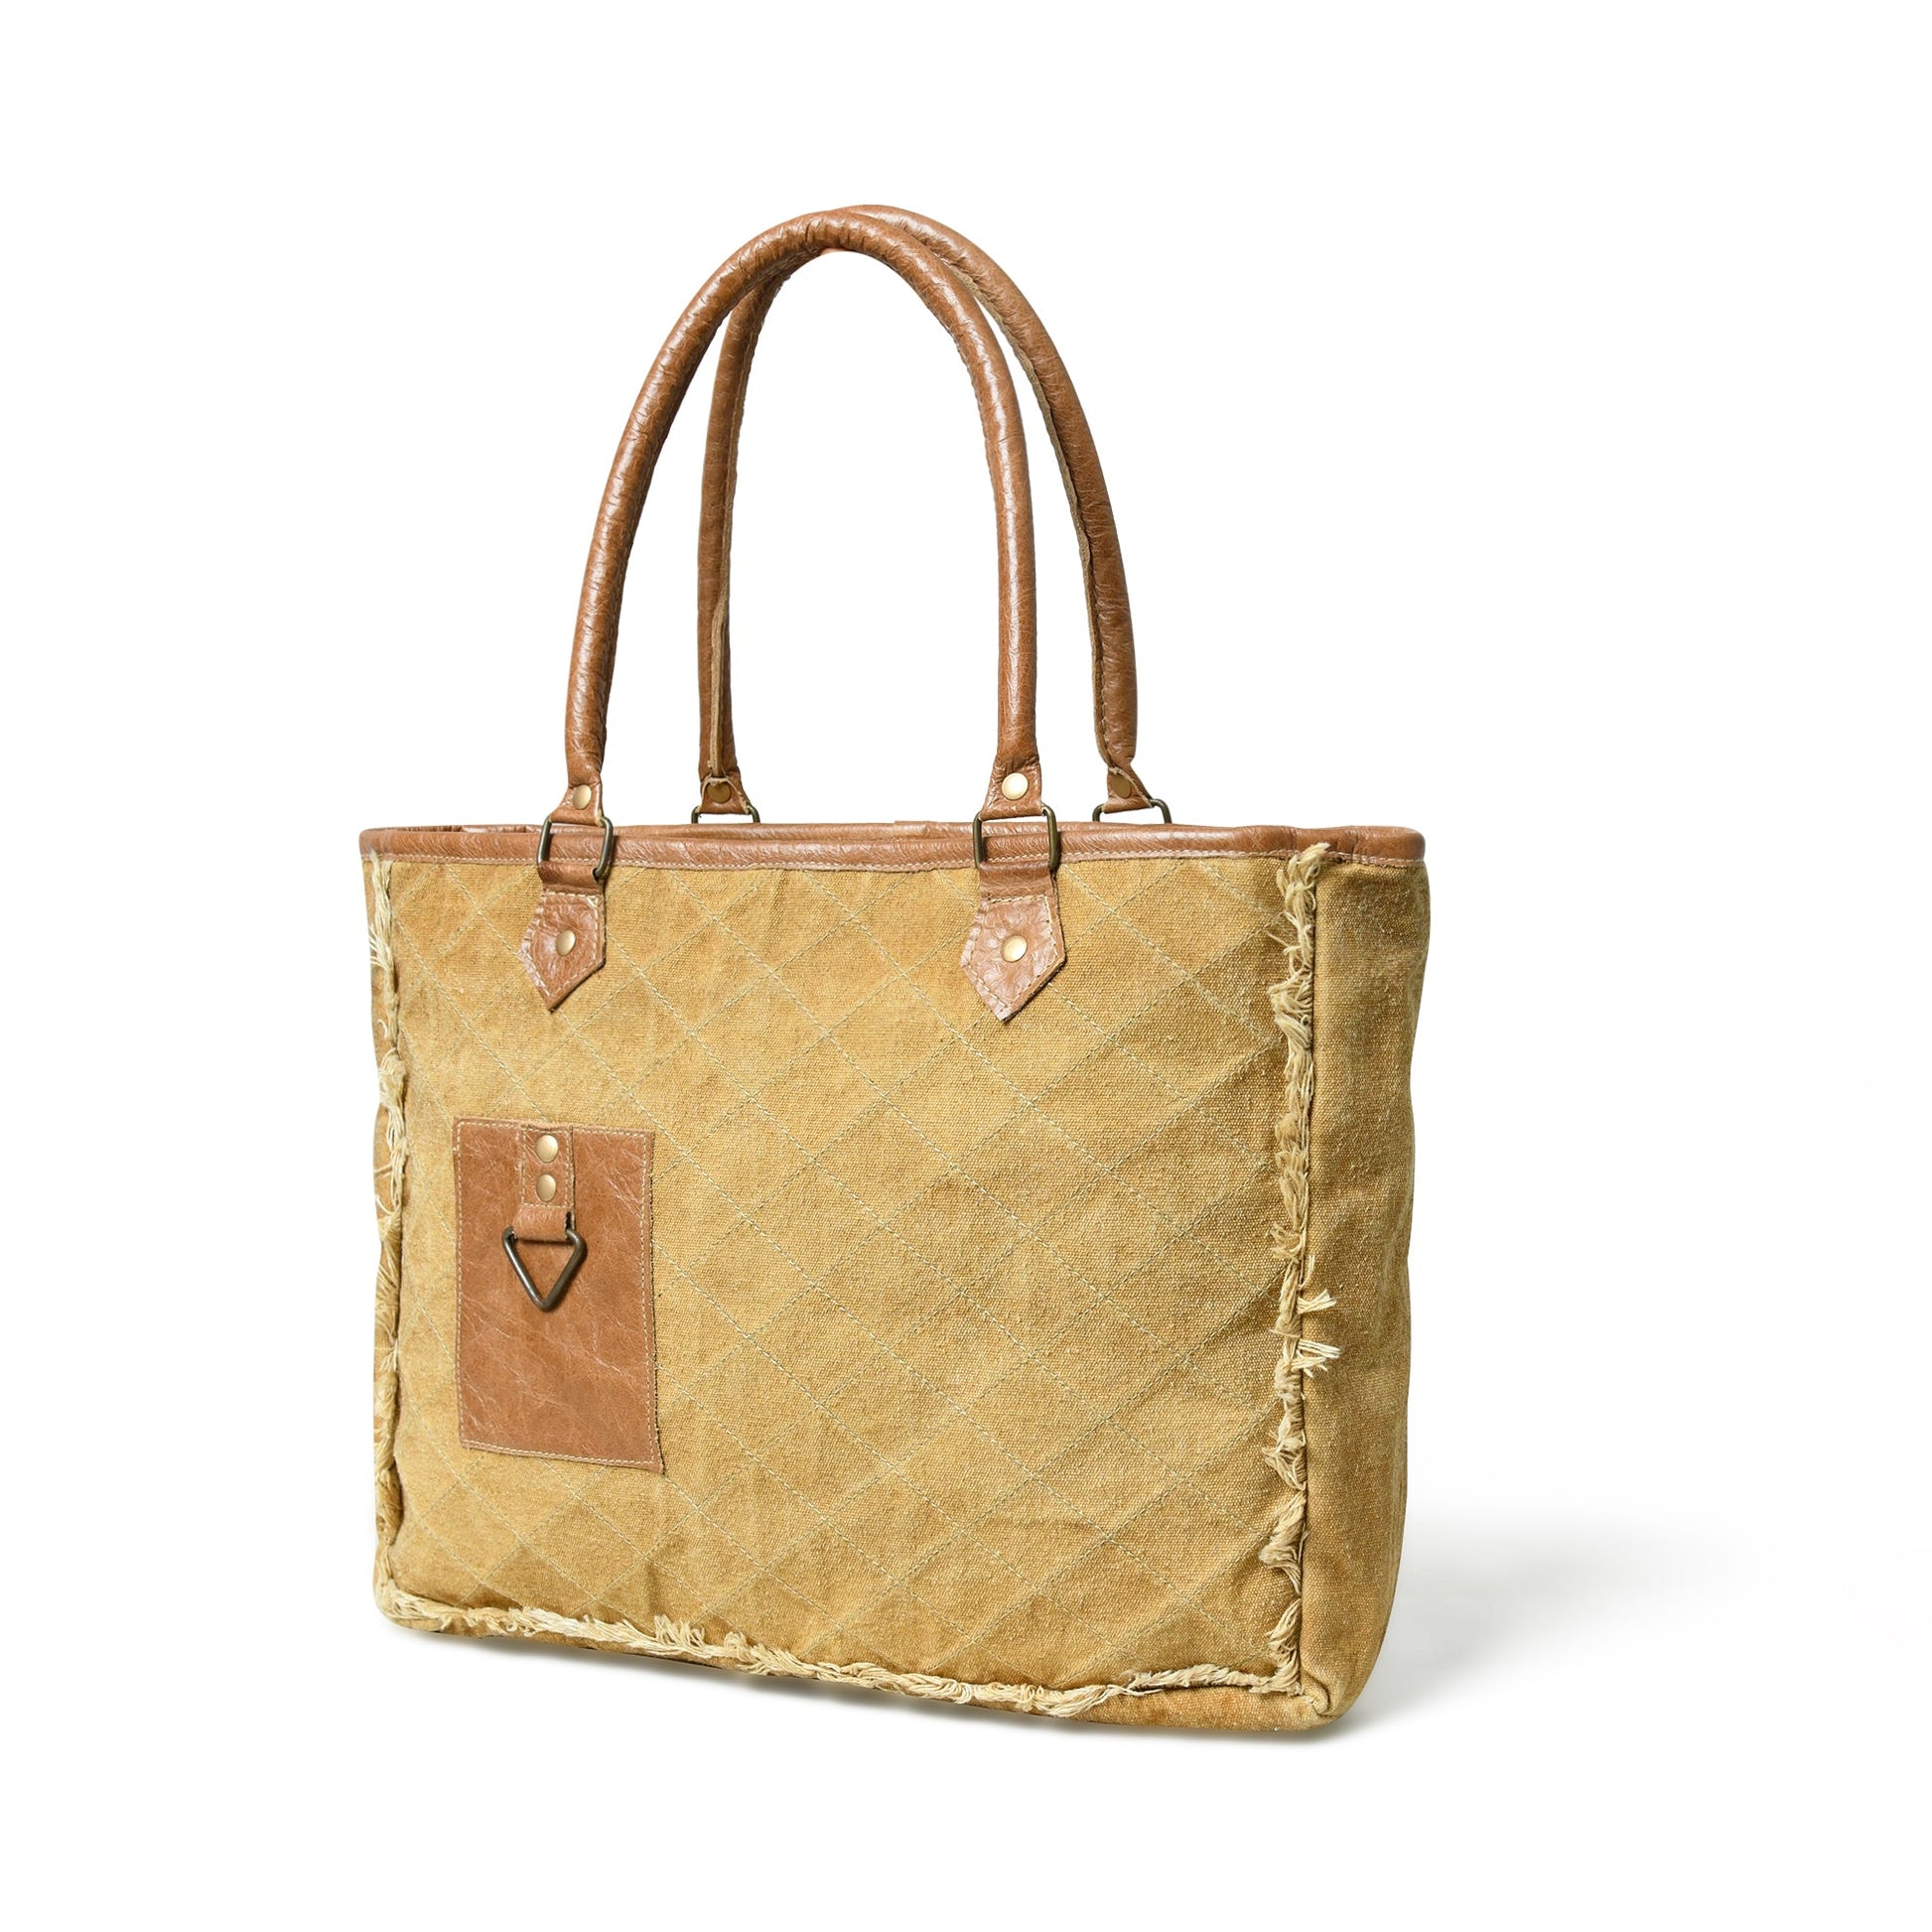 Beige Boho Chic Canvas Bag - The Tool Store